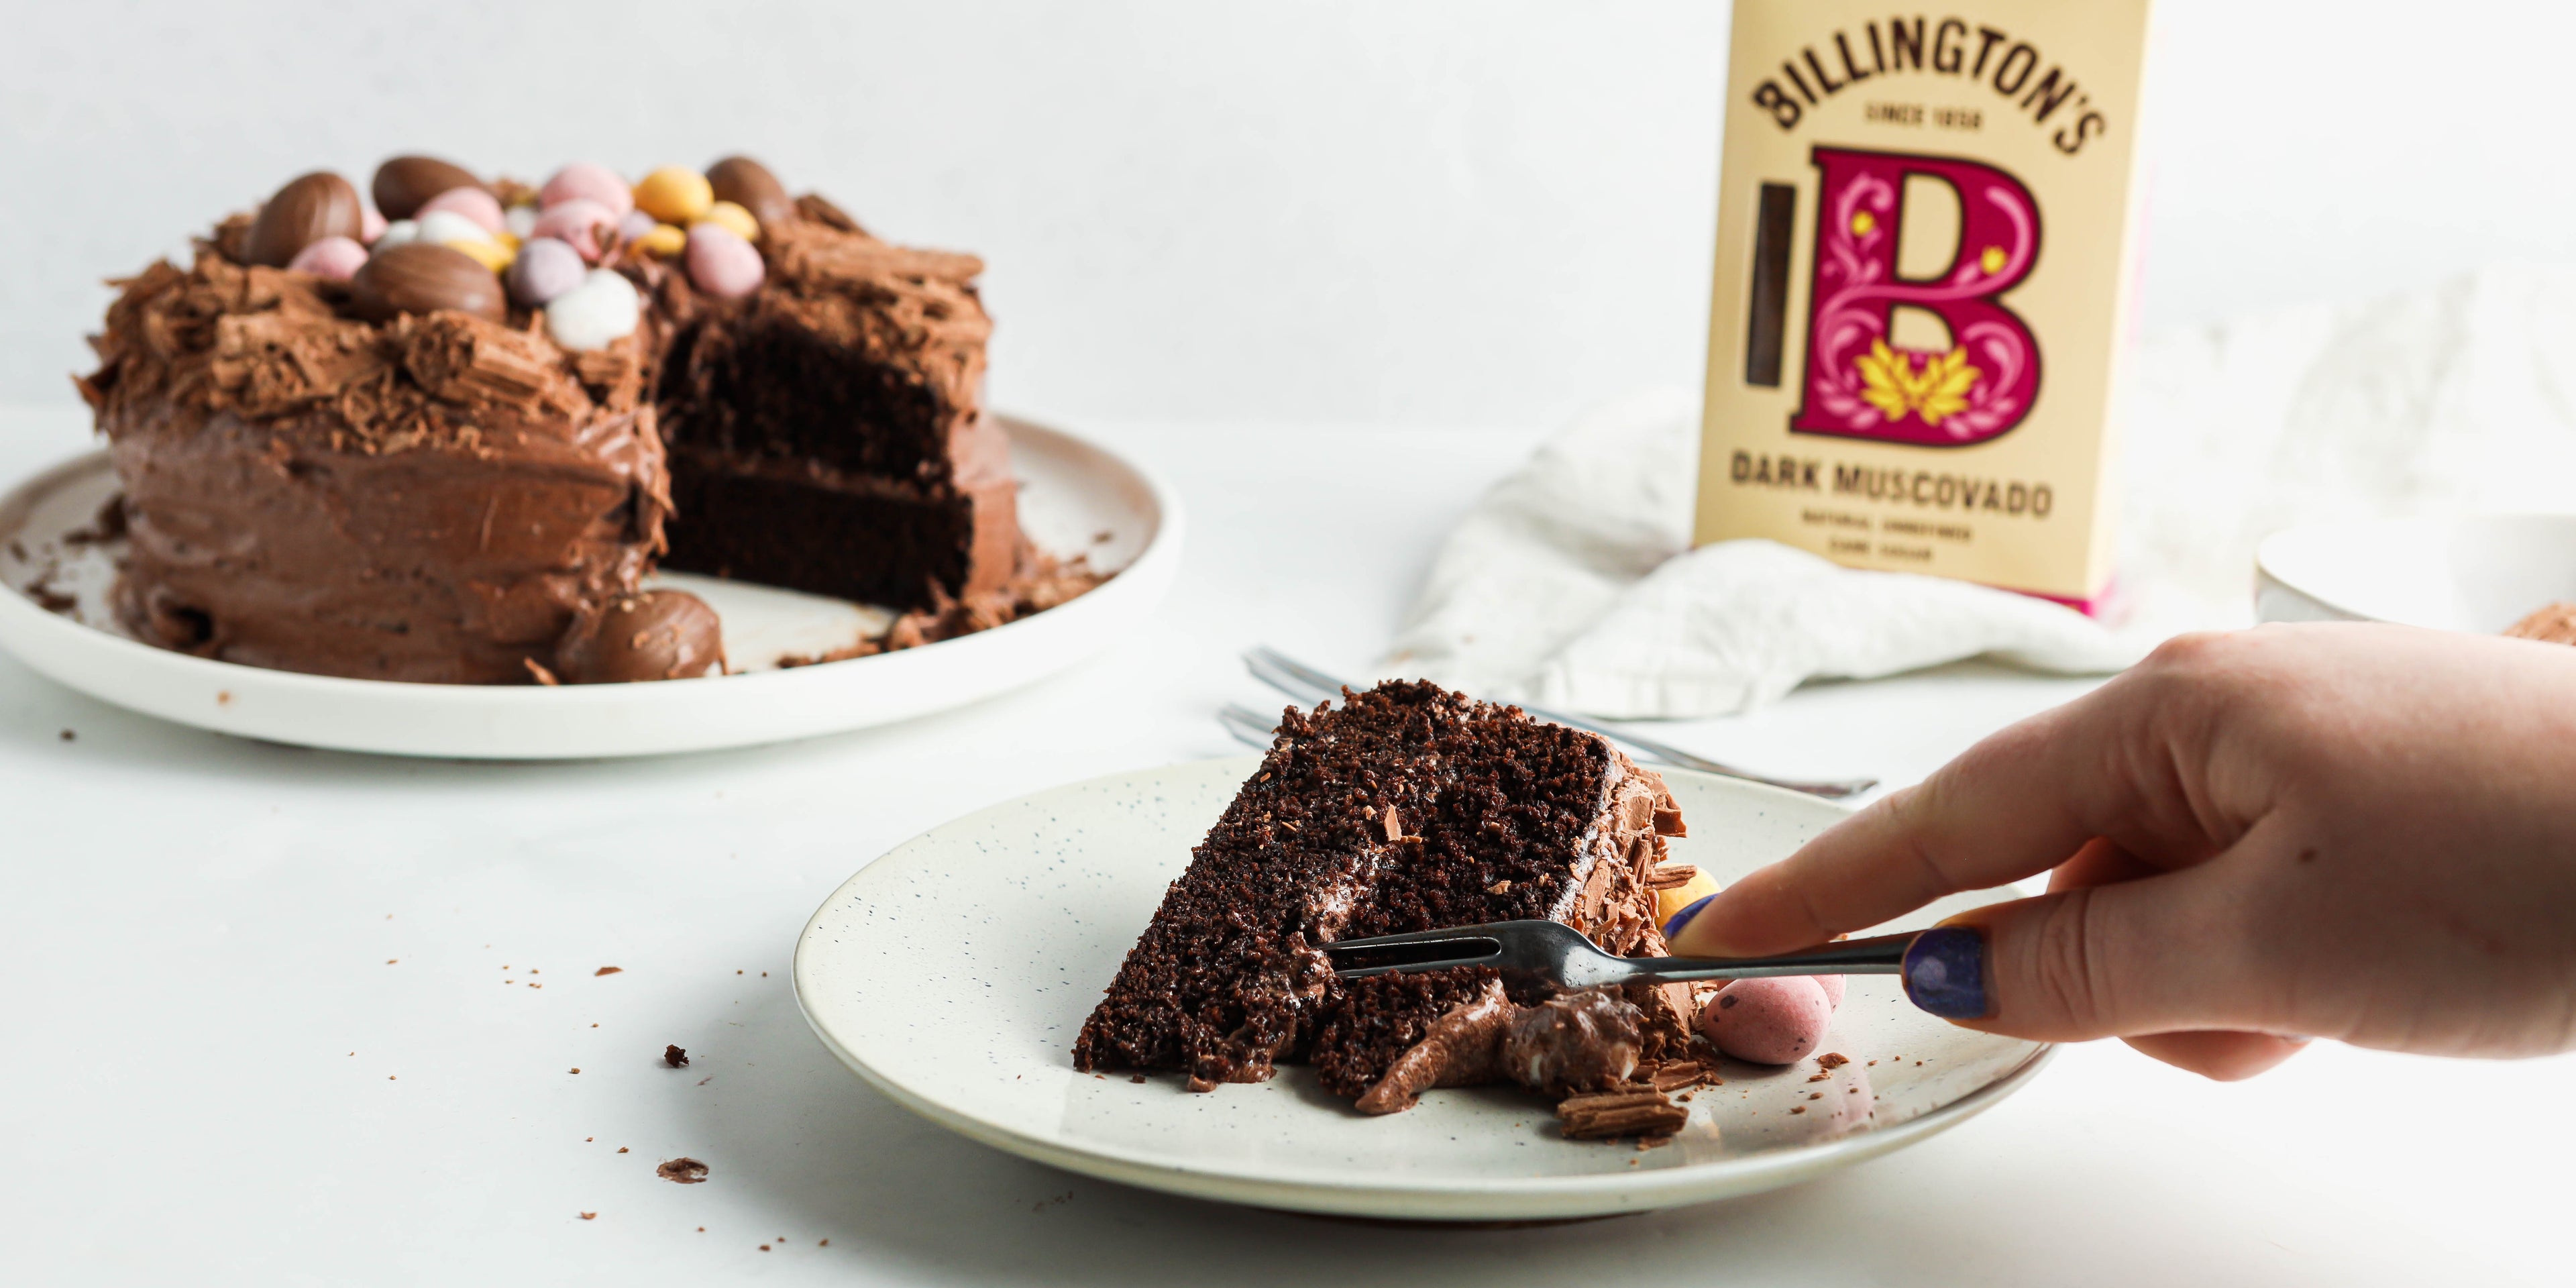 Chocolate Nest Cake slice being cut into with a hand holding a fork, with a box of Billington's Dark Muscovado sugar in the background